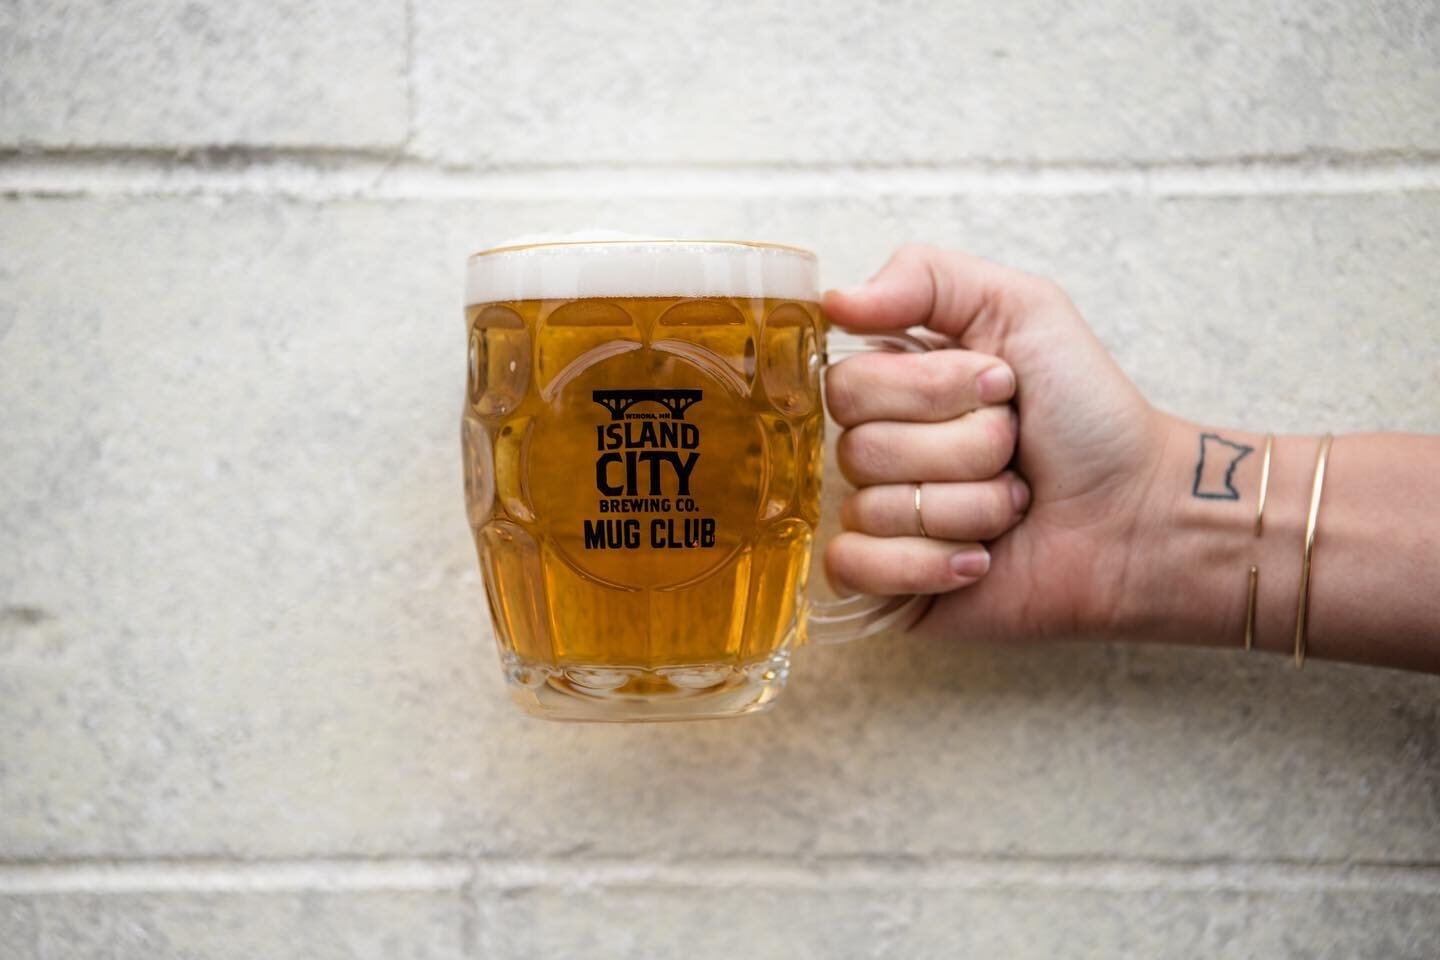 Introducing Island City Mug Club 2020-21! 🍻 $50 gets you a gold rimmed 20oz custom Mug Club glass. Every time you bring your 20oz mug in, you will receive a full pour for the price of a pint! That&rsquo;s 4 free ounces of beer every time you fill up